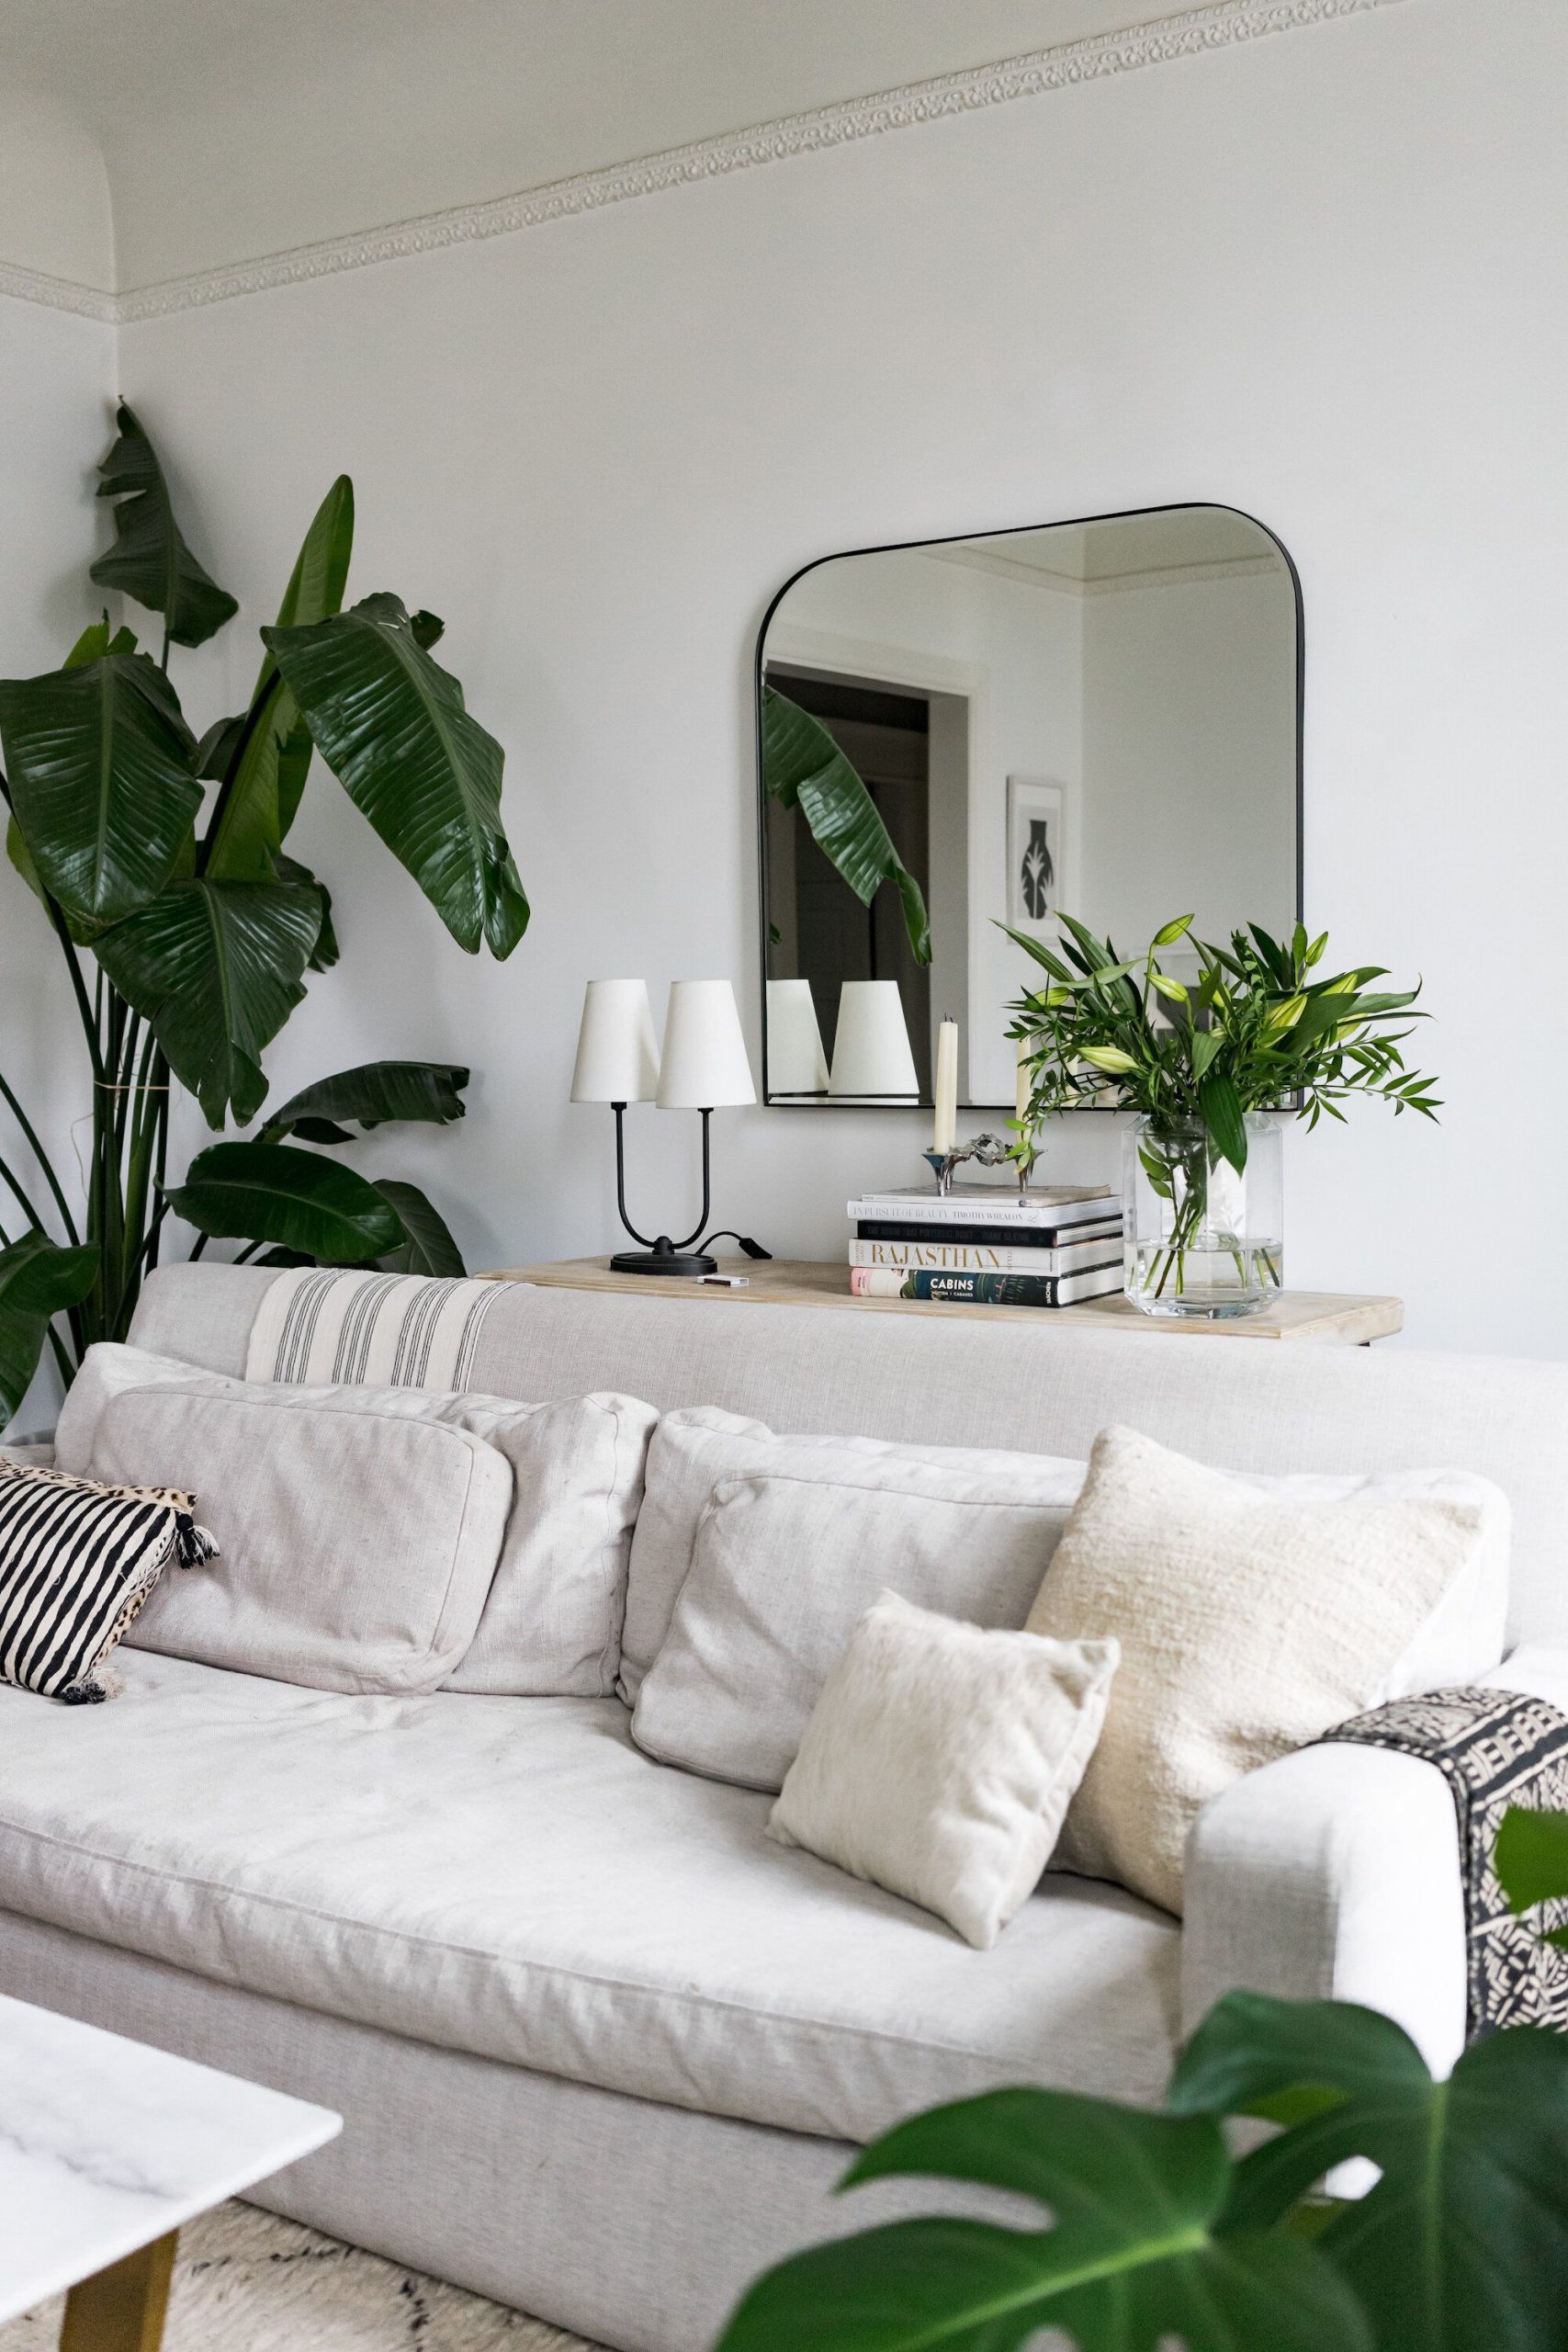 Chic Interior with A Natural Reflection on The Wall Mirror